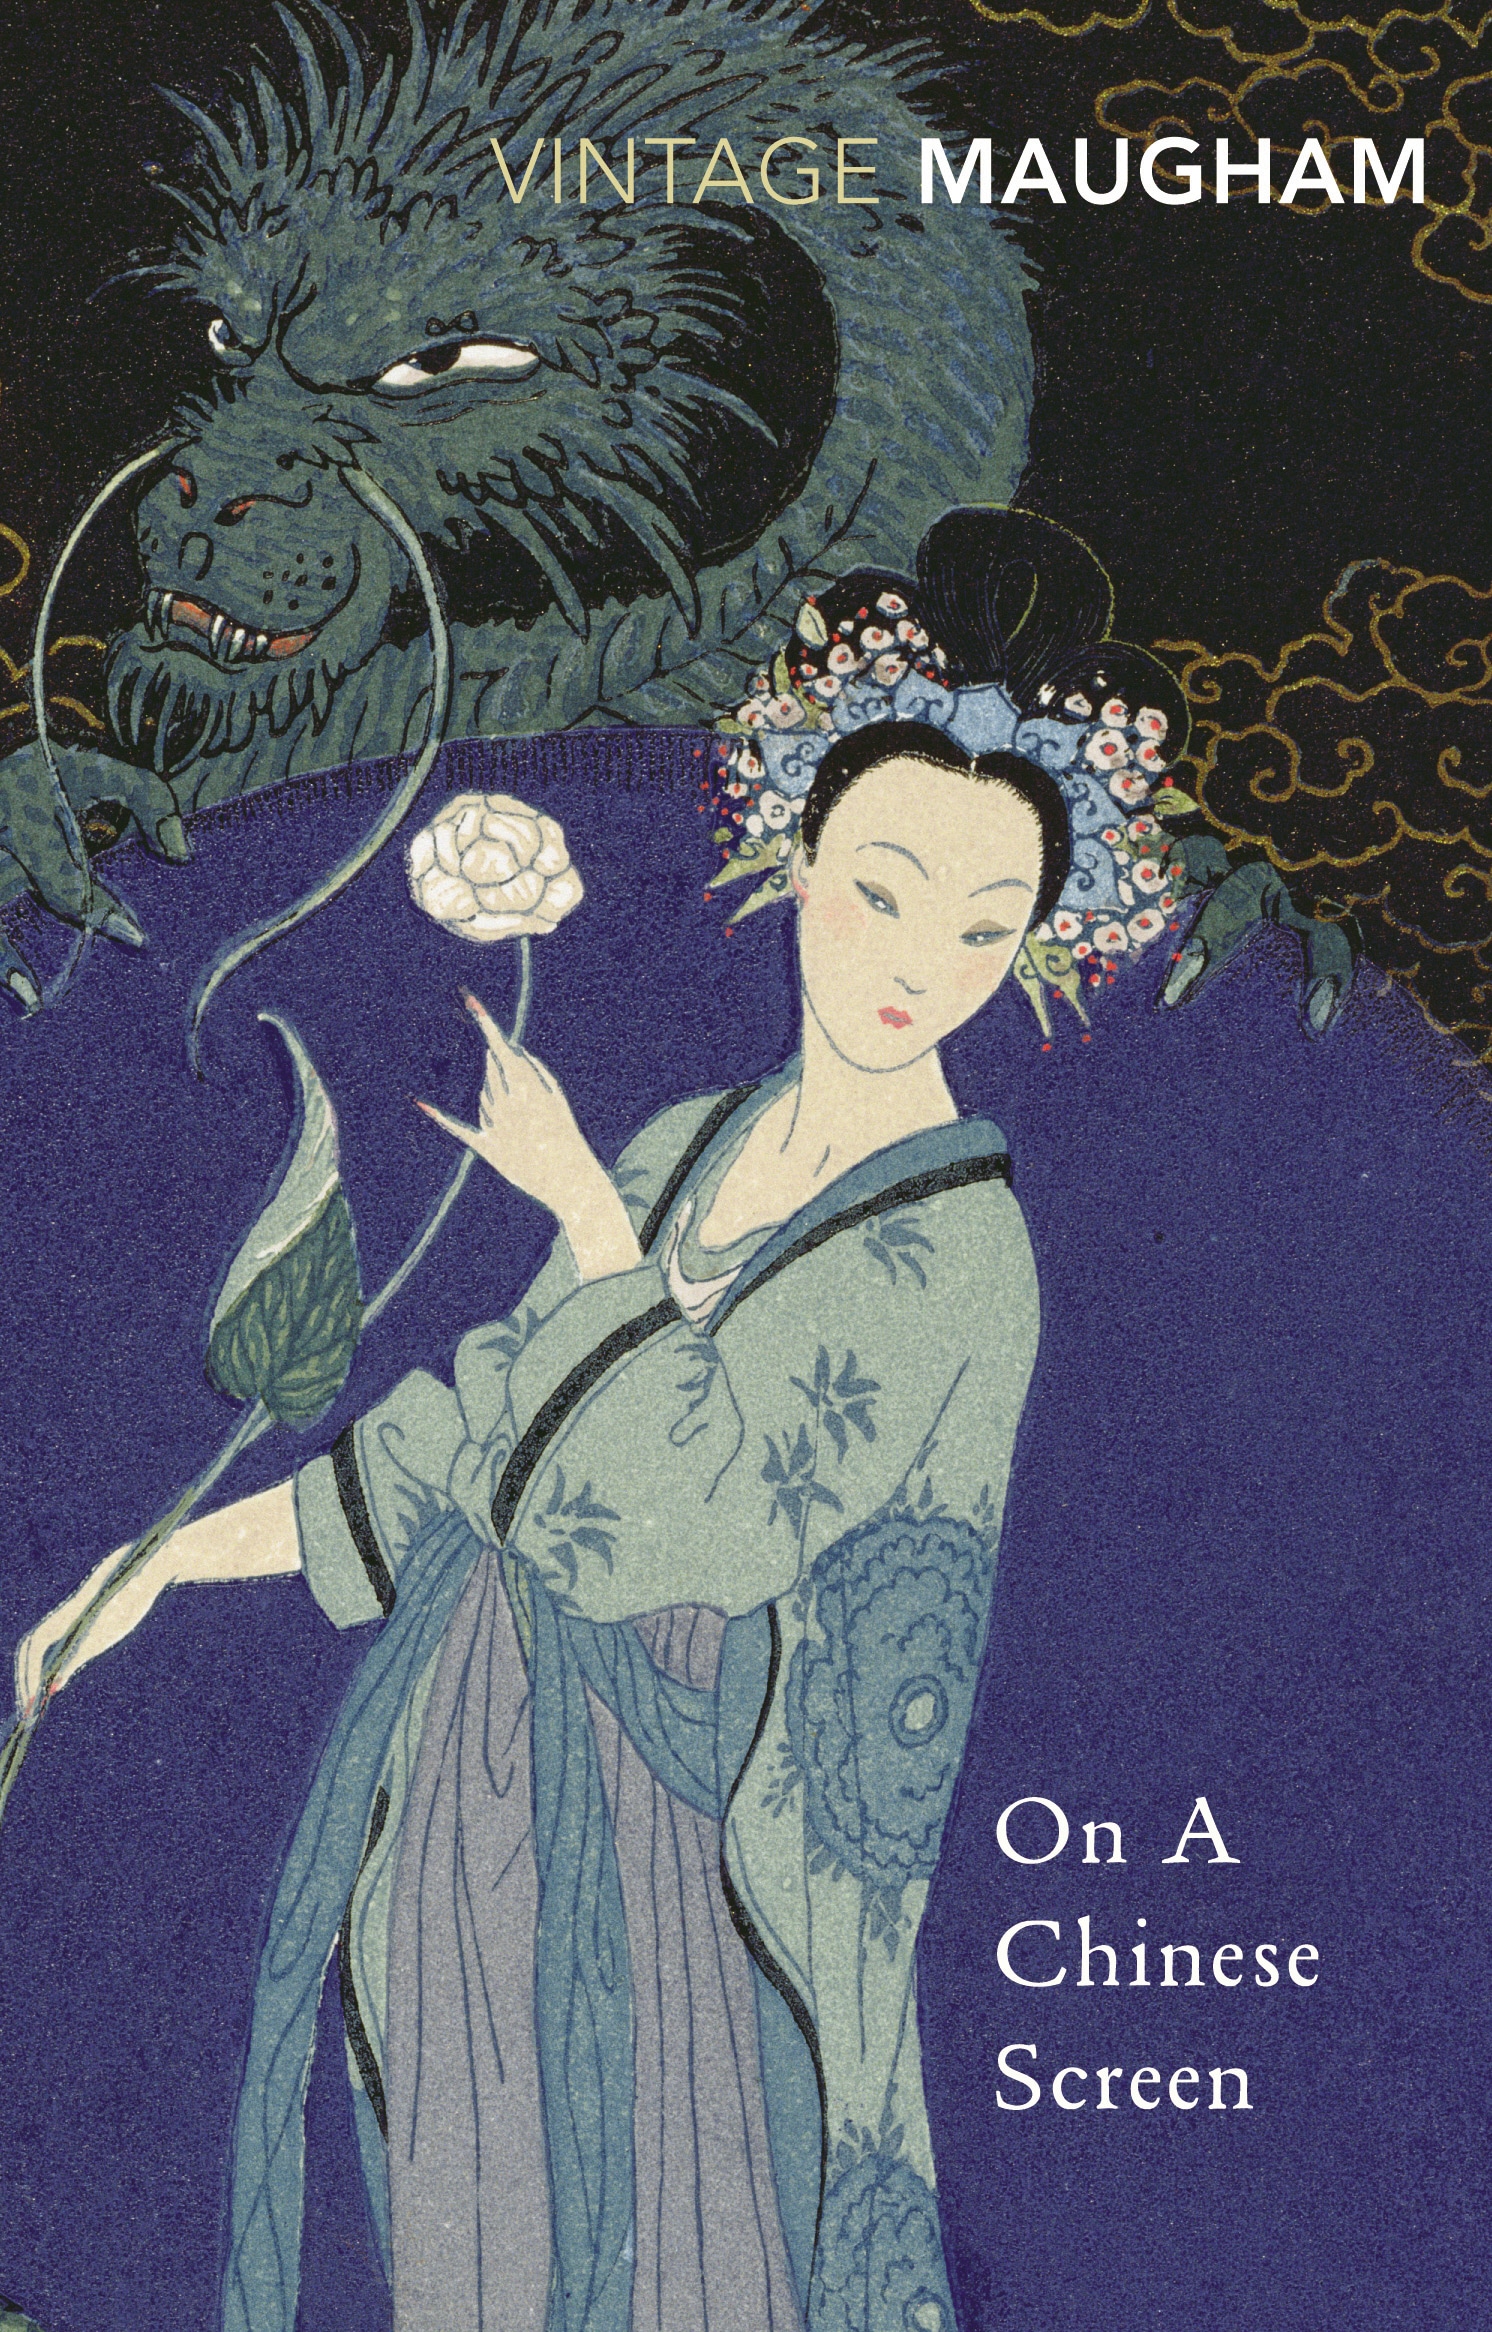 Book “On A Chinese Screen” by W. Somerset Maugham — July 6, 2000